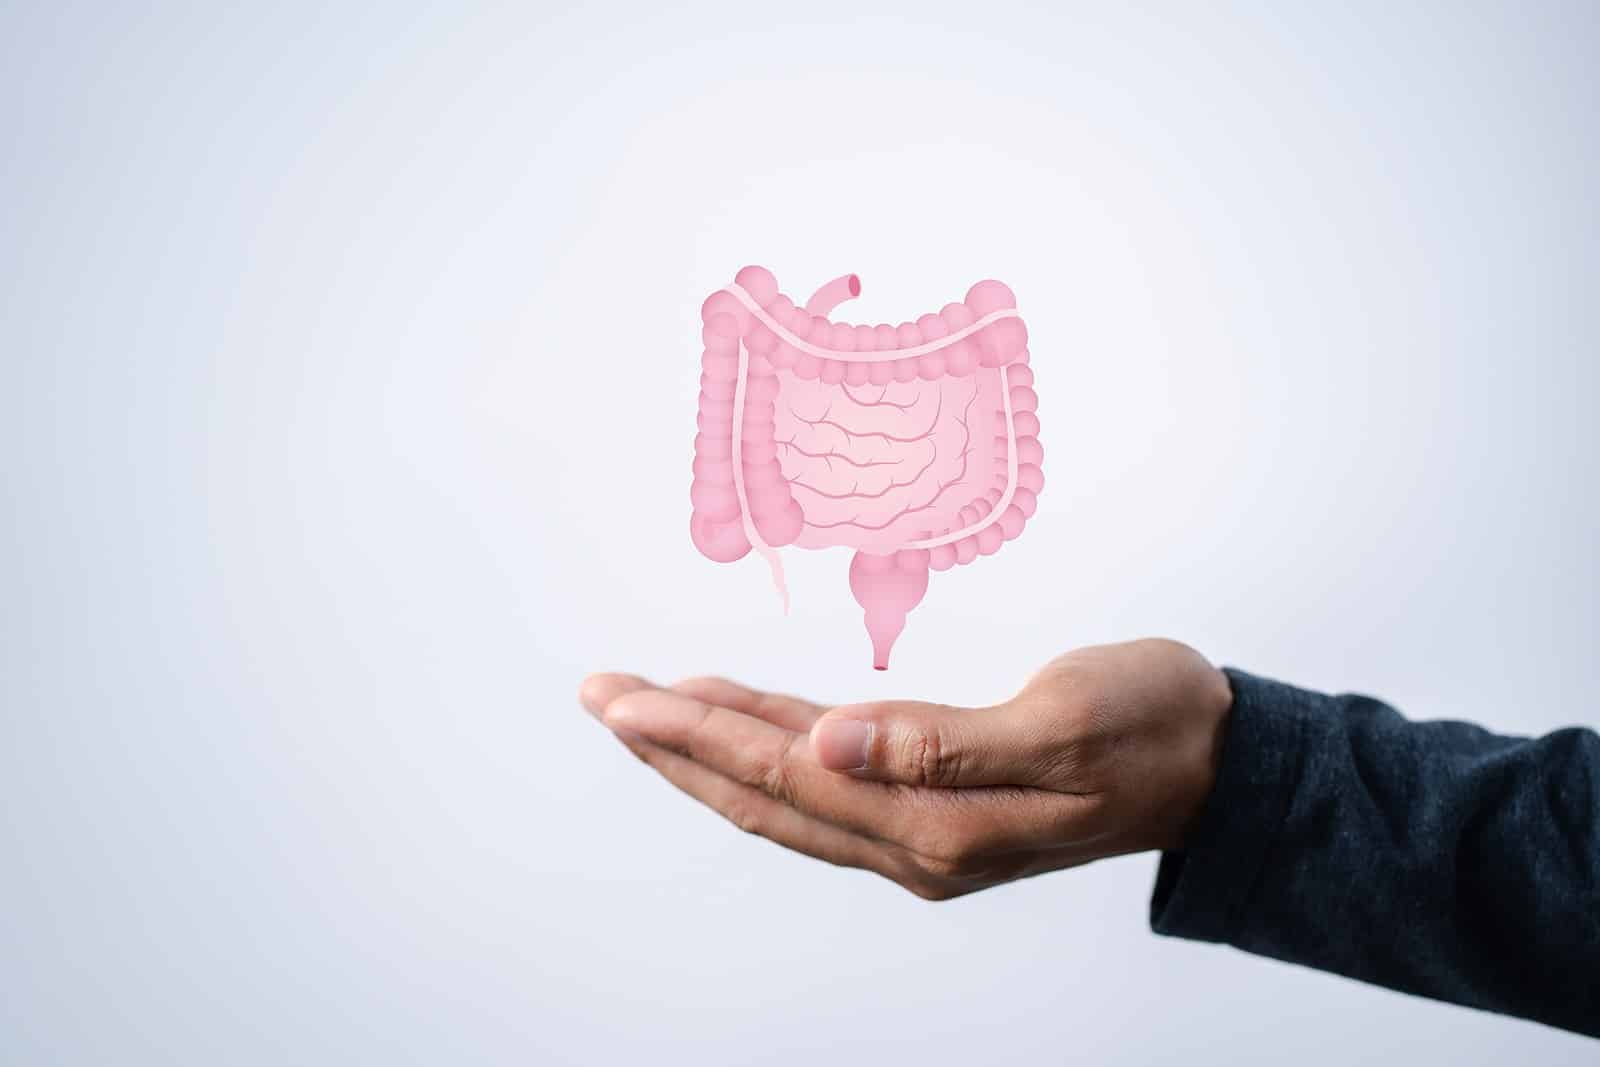 Scientists Identify Connections Between Autism and the Gut Biome